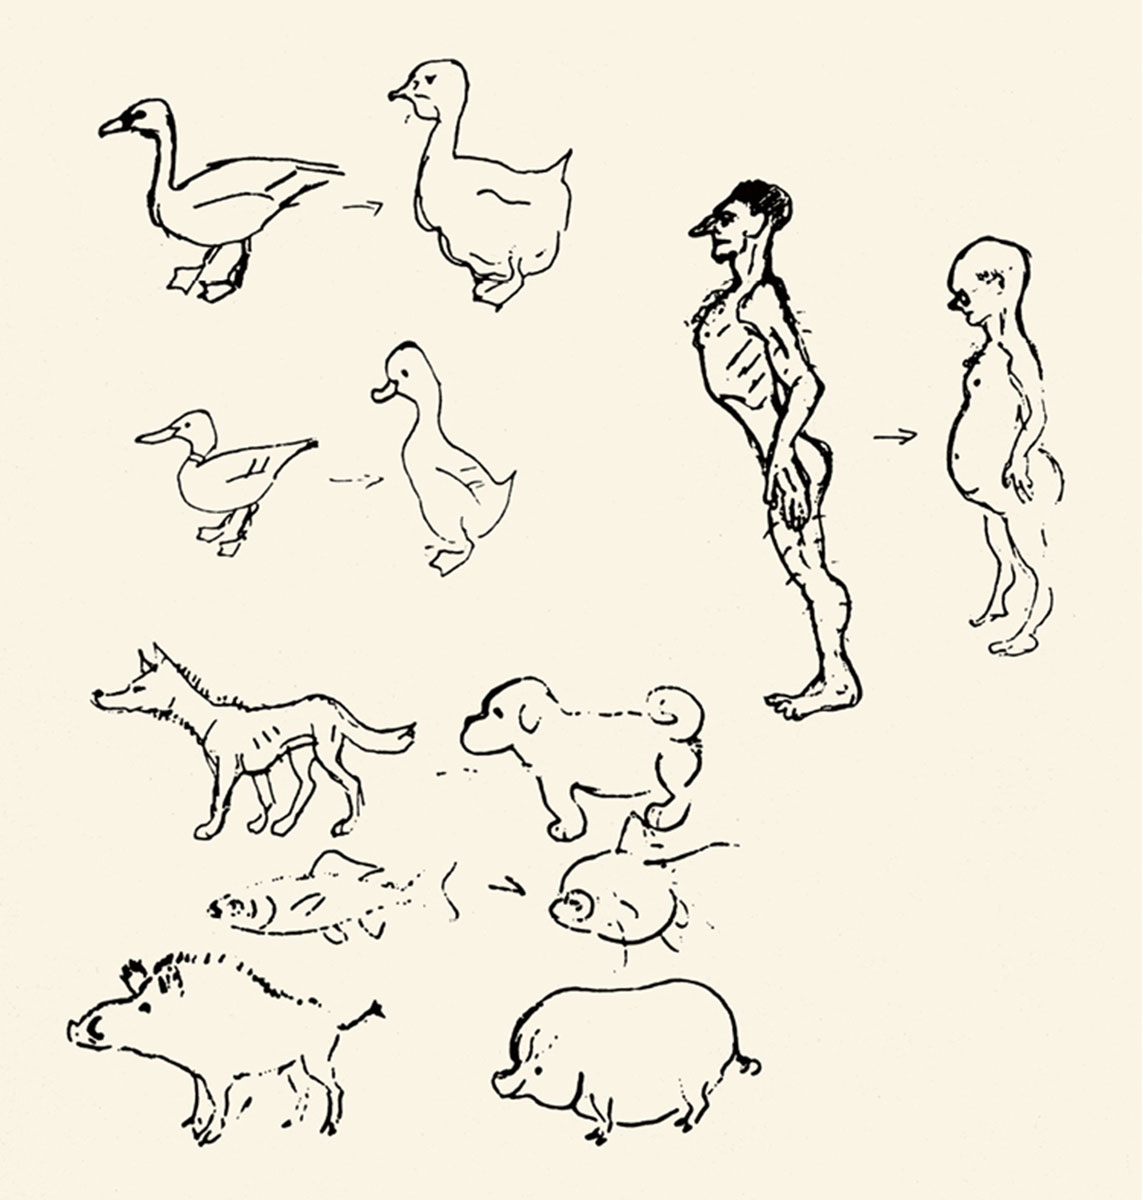 Sketch by Konrad Lorenz comparing the morphology of wild and domesticated animals—humans included. From a letter to Oskar Heinroth, 18 January 1939.